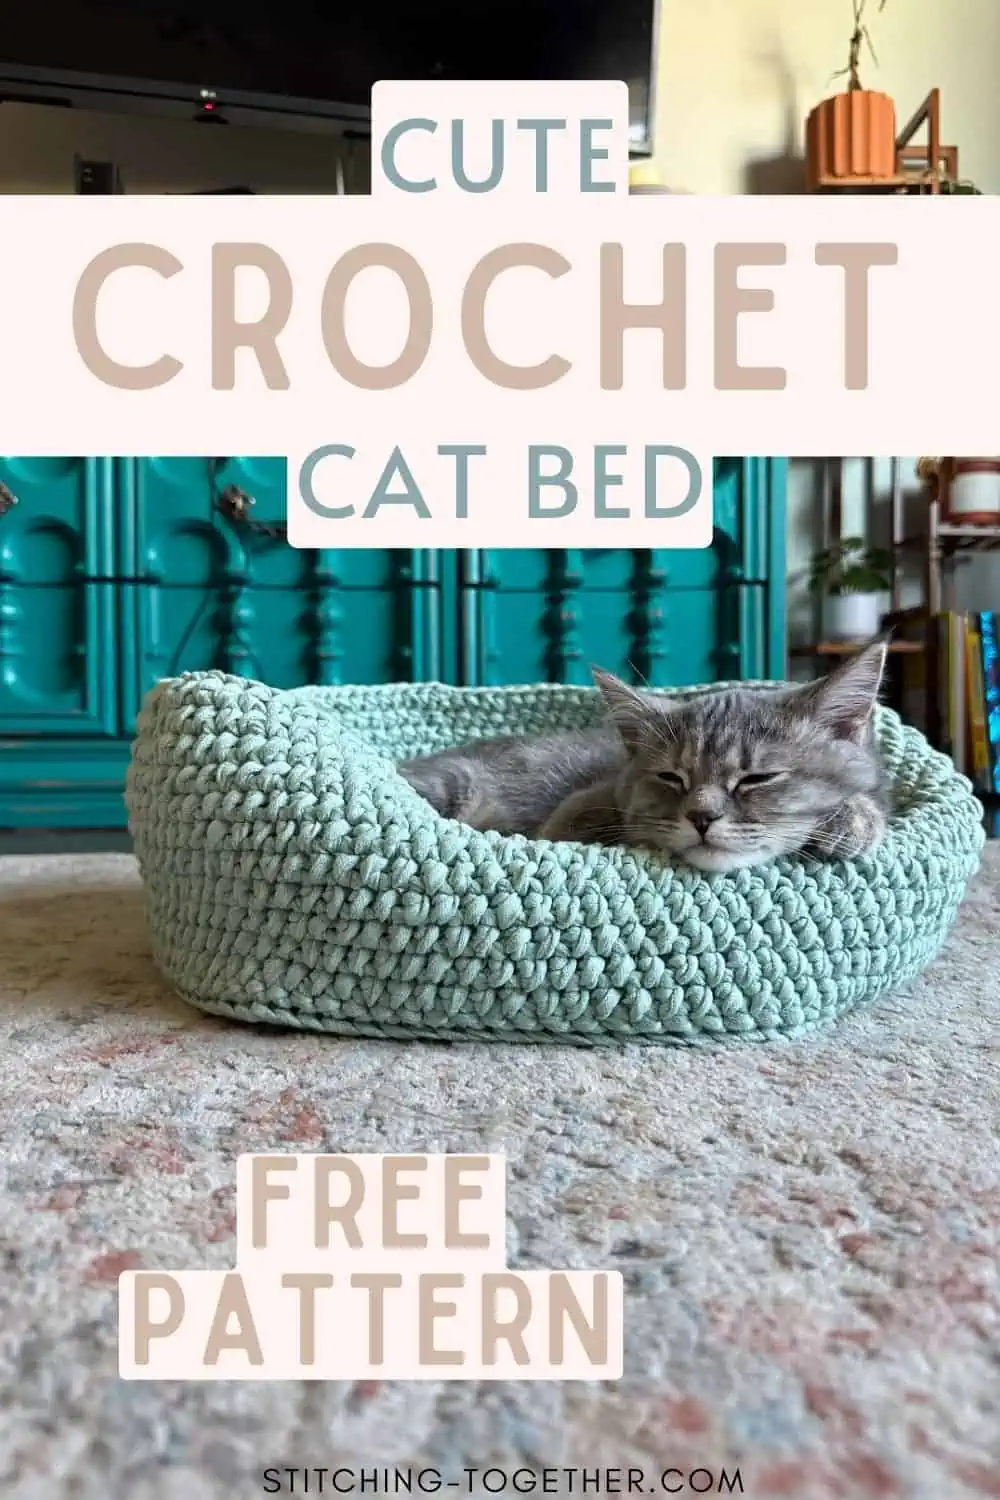 sleeping kitty in a cat bed with text overlay reading "cute crochet cat bed free pattern"